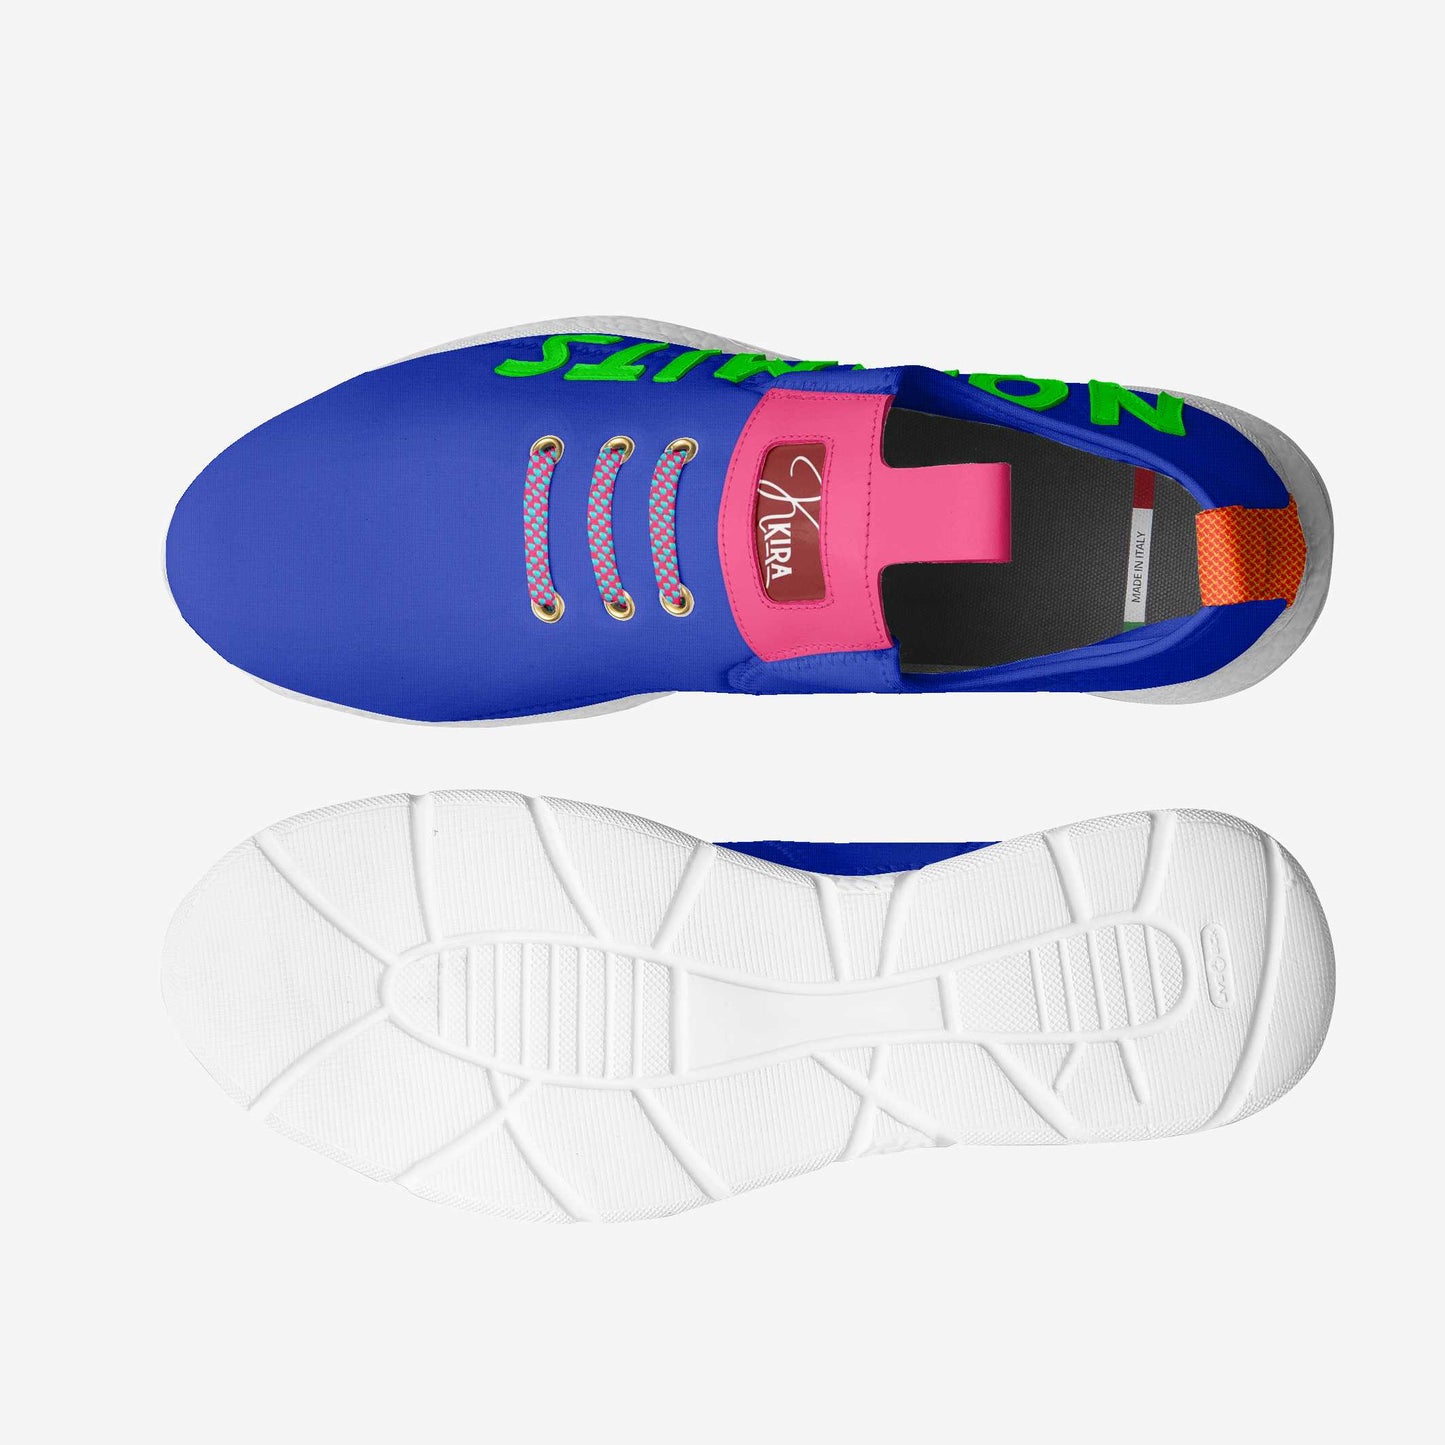 Unisex Colorful Sneakers | Multi Colored Sneakers | Kkira Shoes